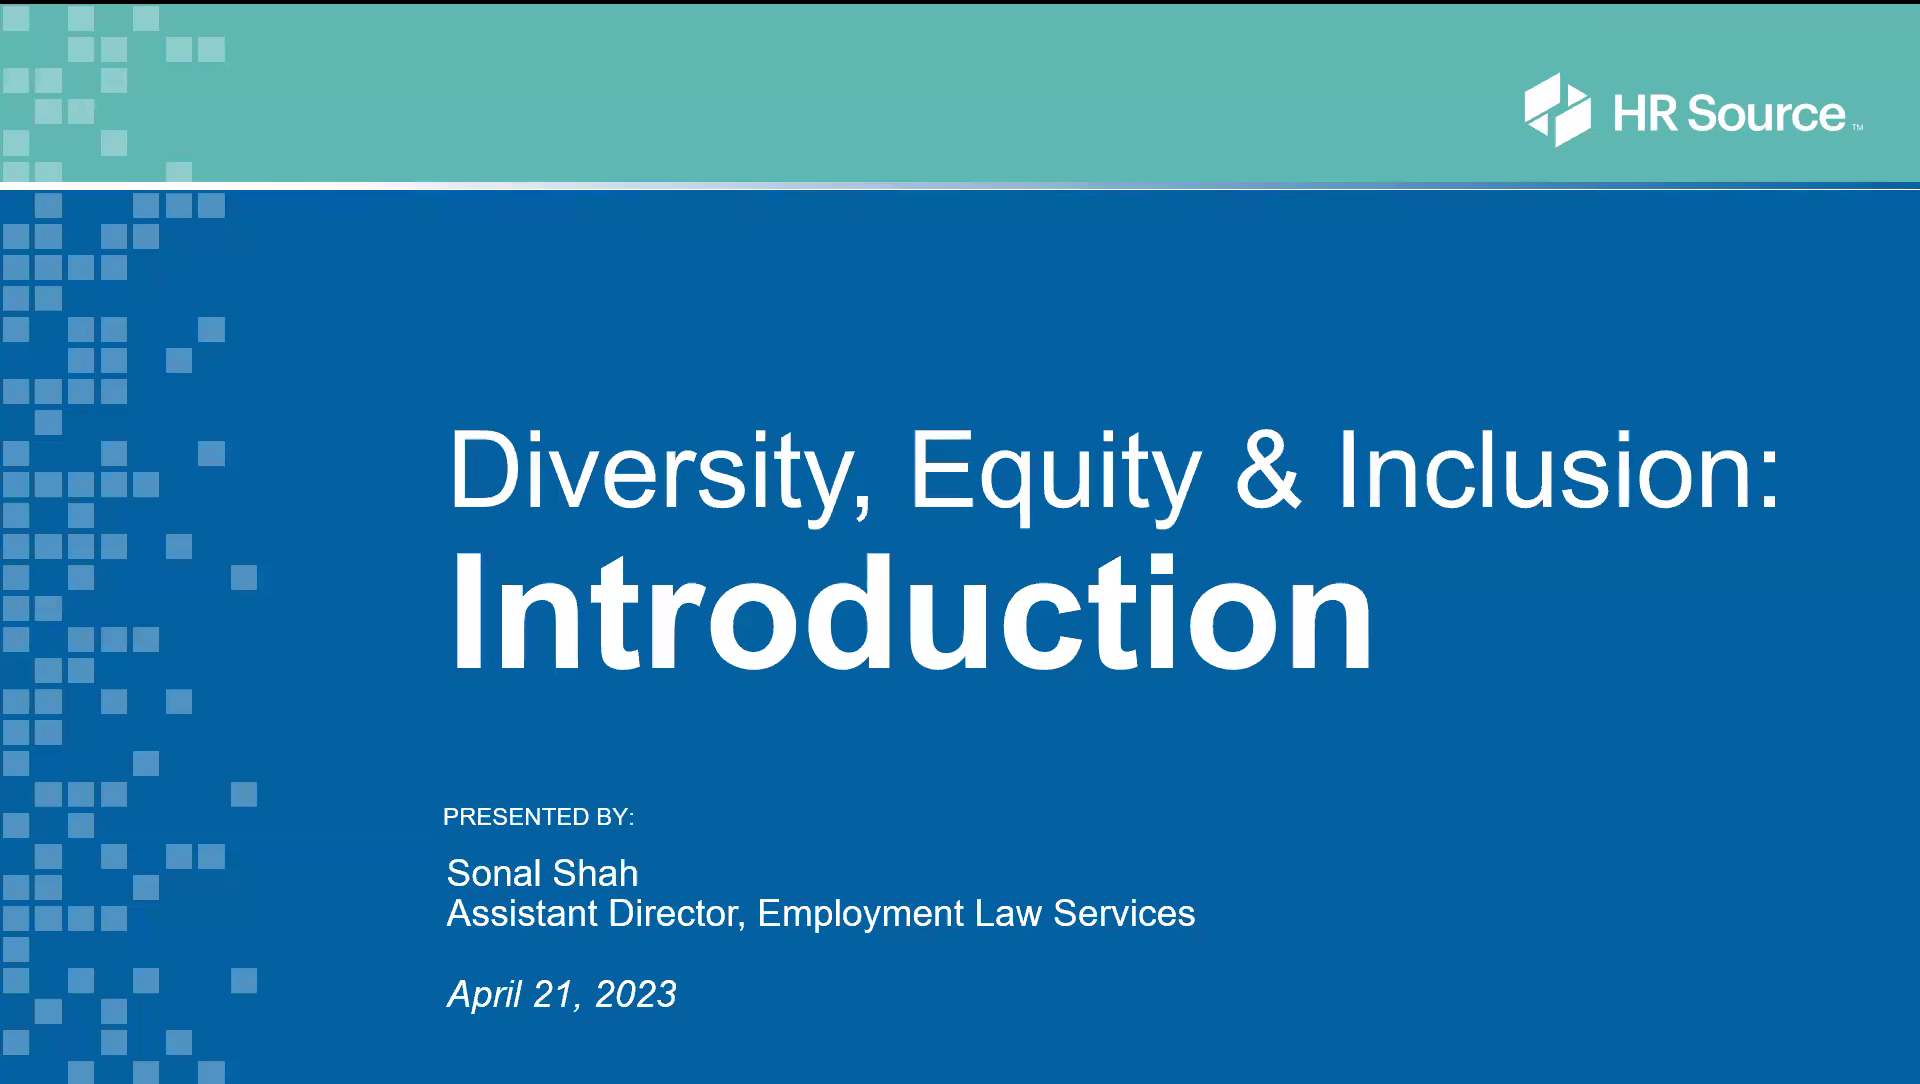 Diversity, Equity & Inclusion: Introduction